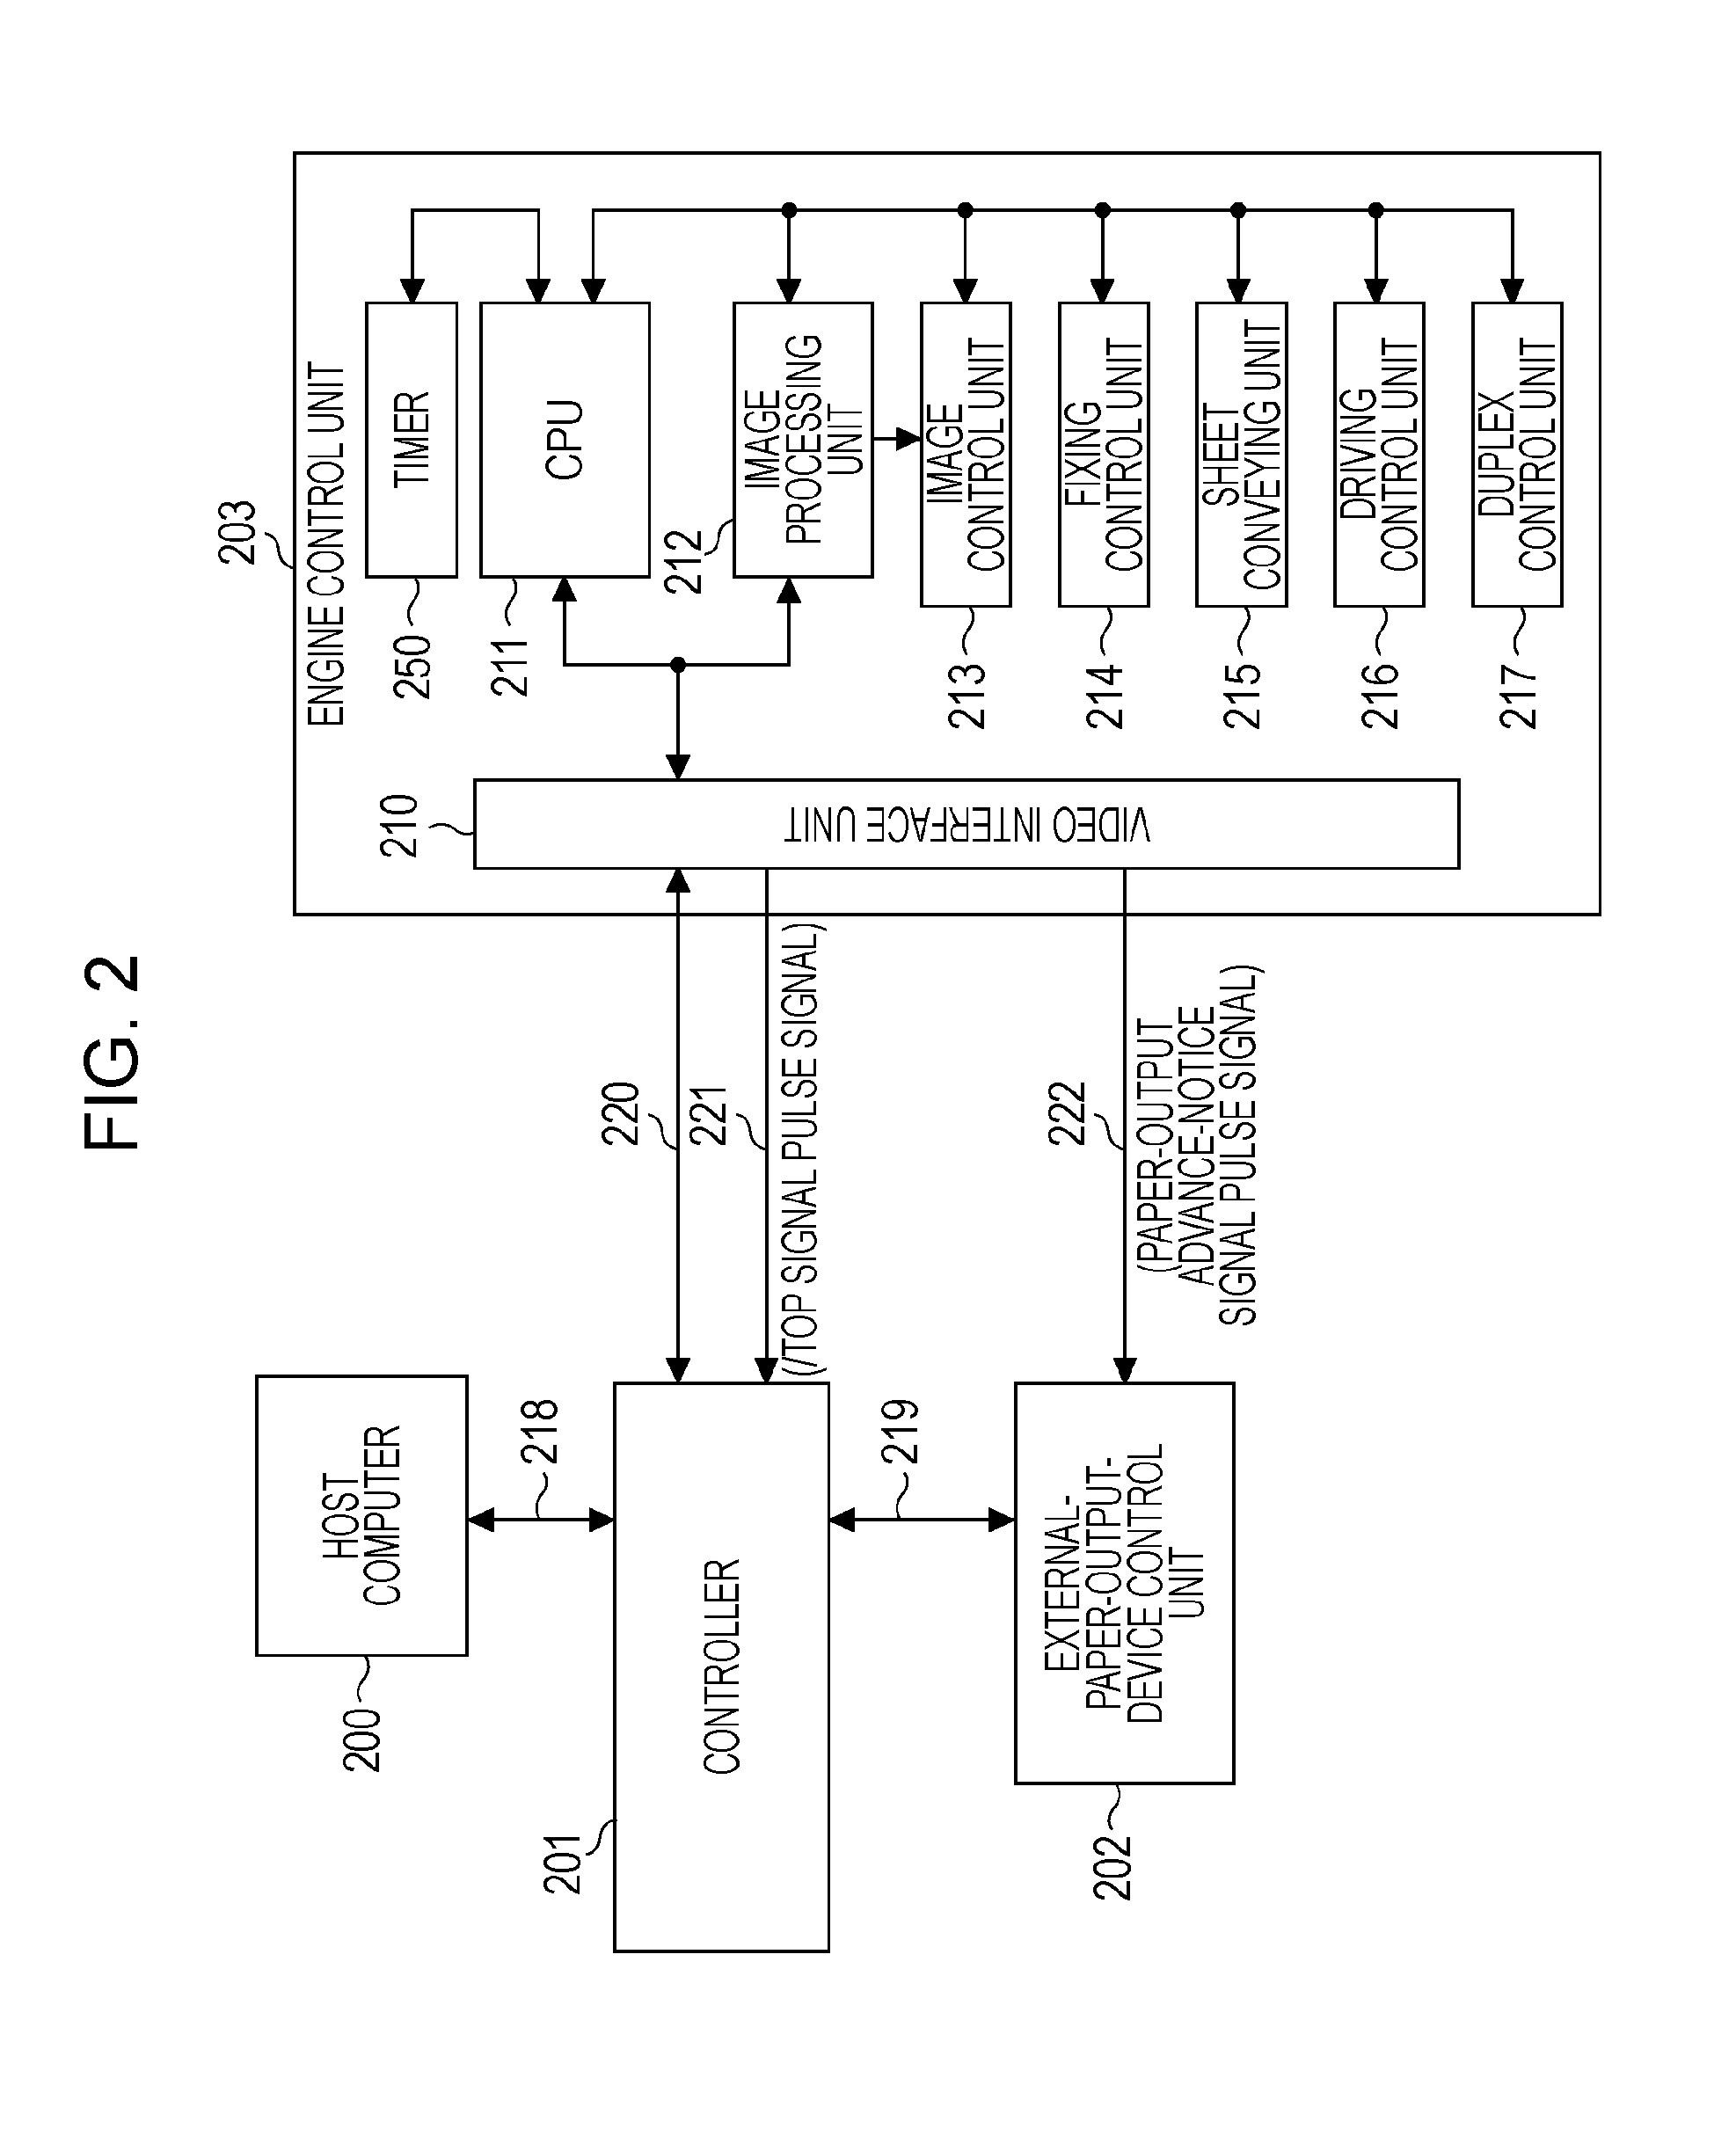 Image forming apparatus and method for controlling feeding of sheets